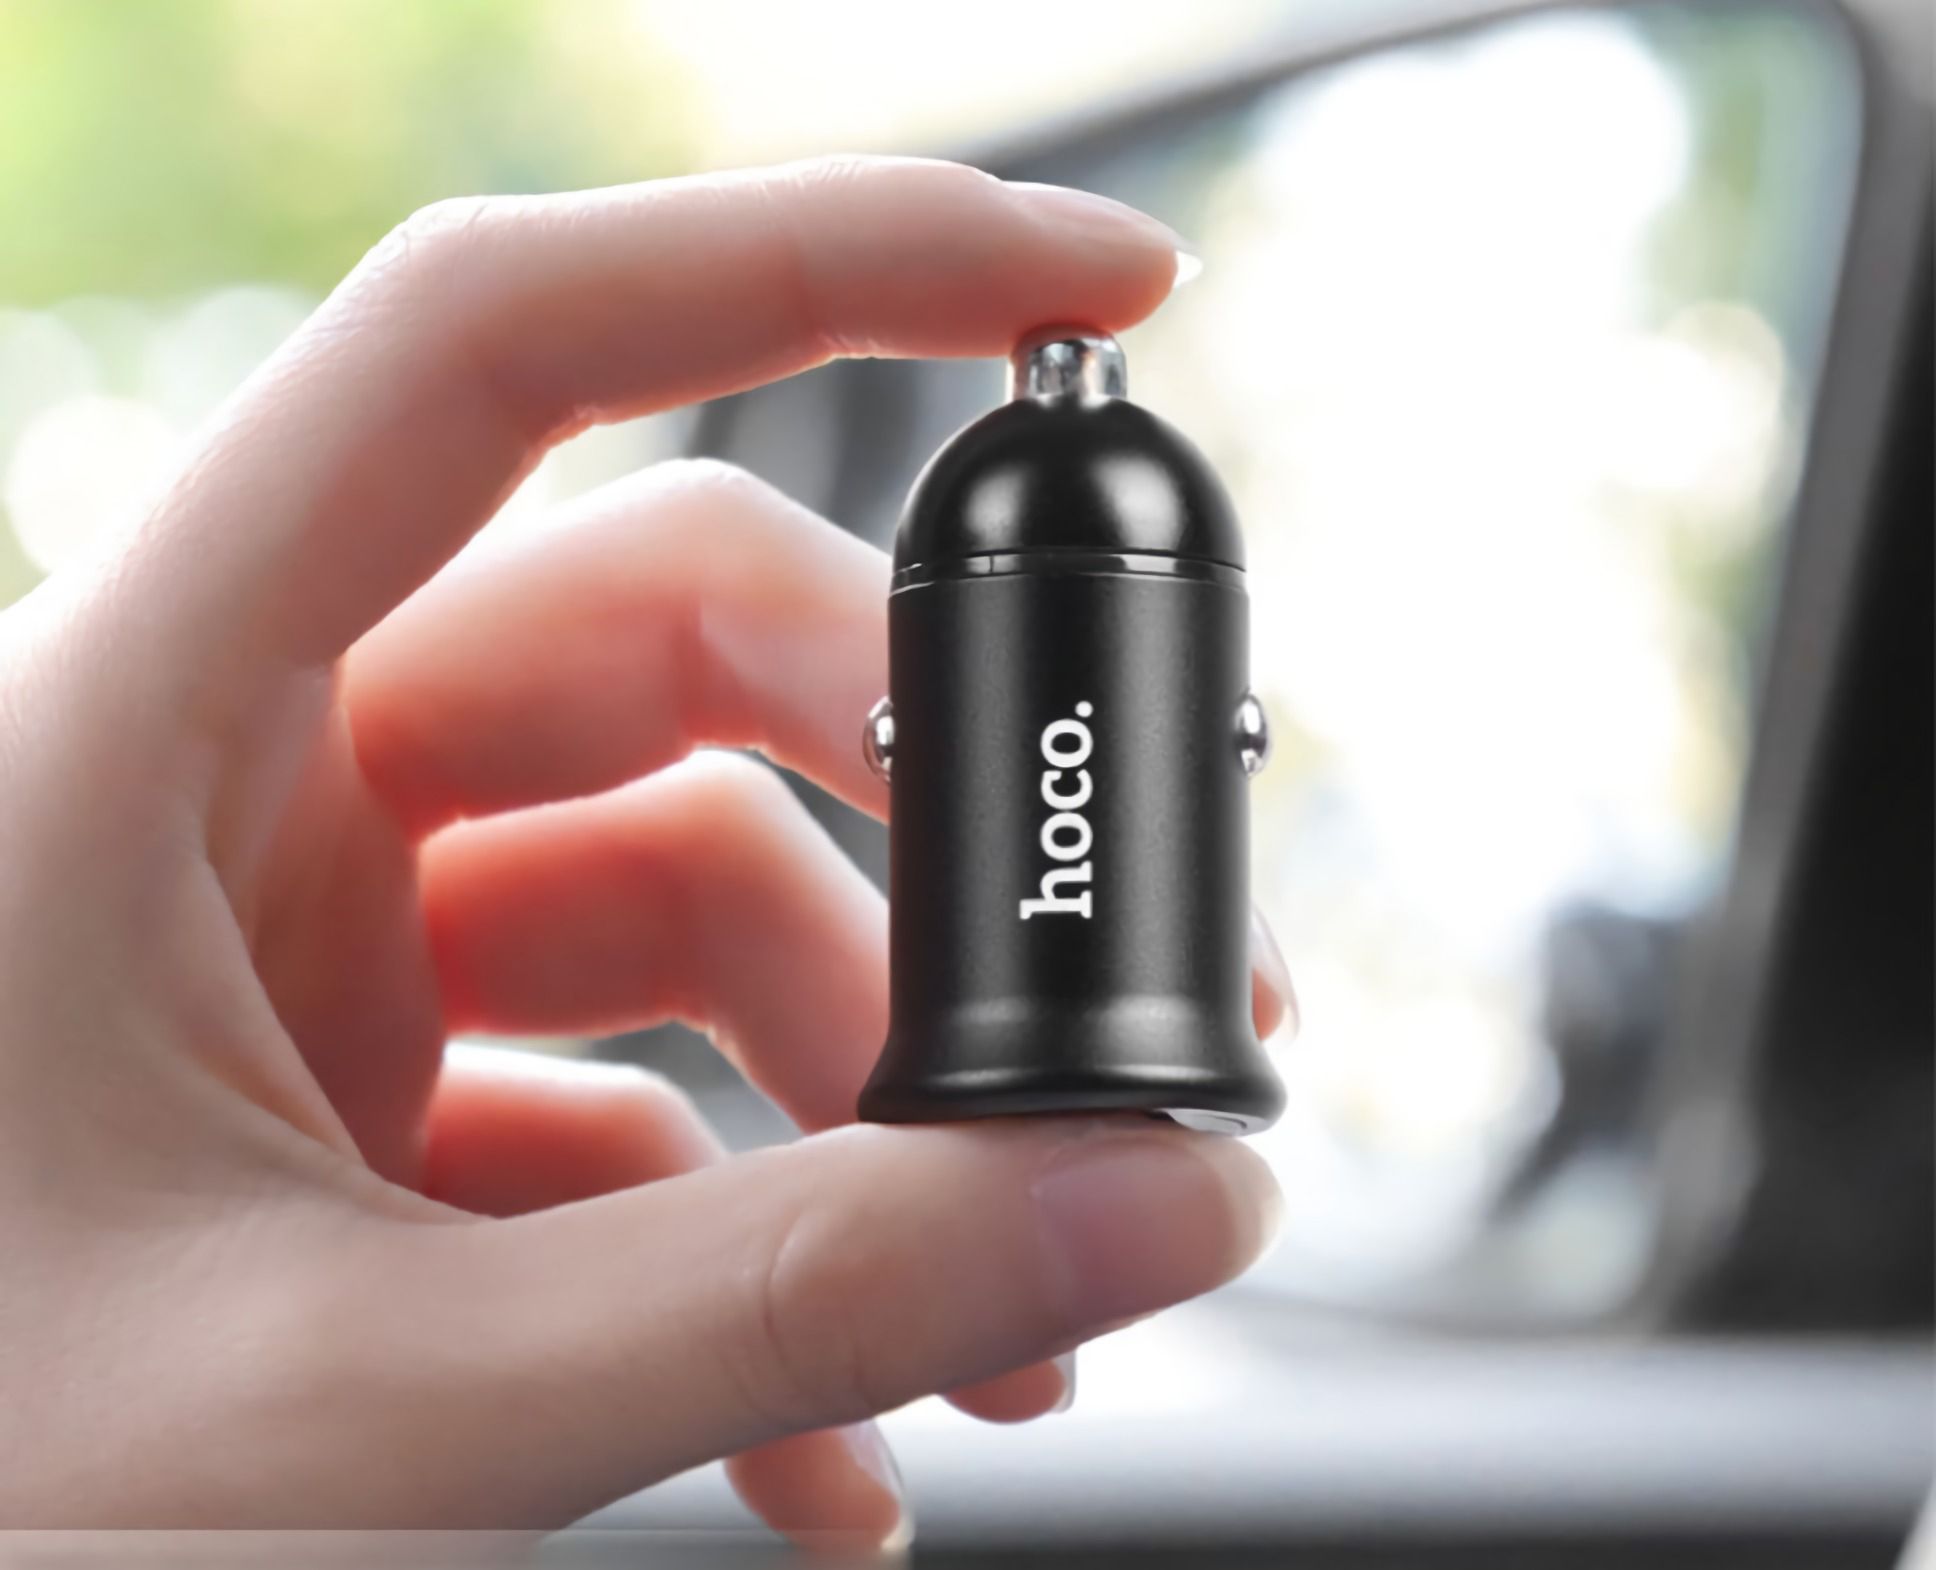 Hoco-Z30-Mini-Car-Charger-31A-Dual-USB-Charging-Block-For-Laptop-Notebook-Mobile-Phone-1698862